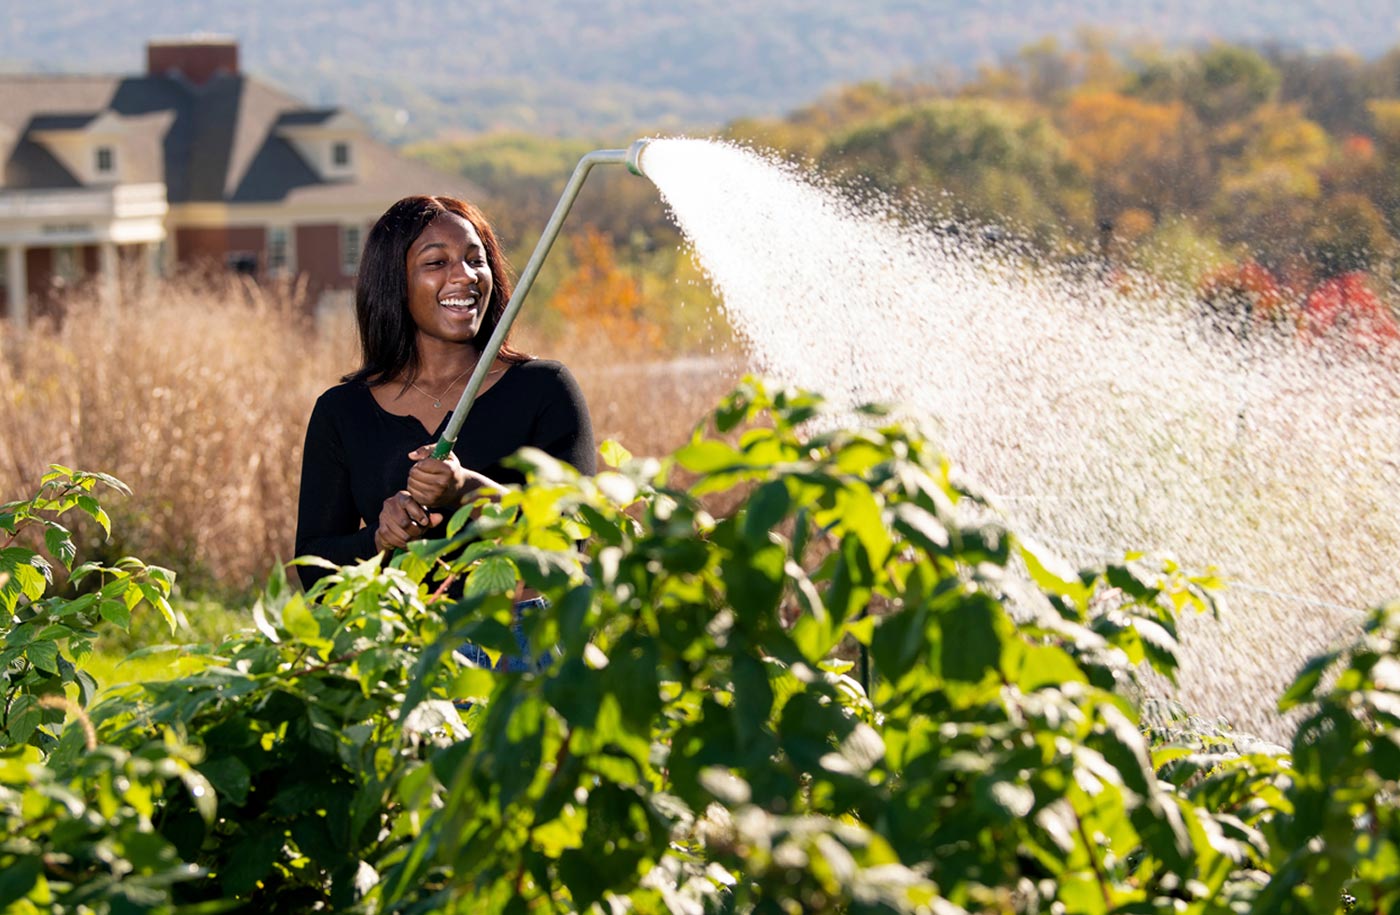 student Maya Asante waters plants in a field using a long handled hose